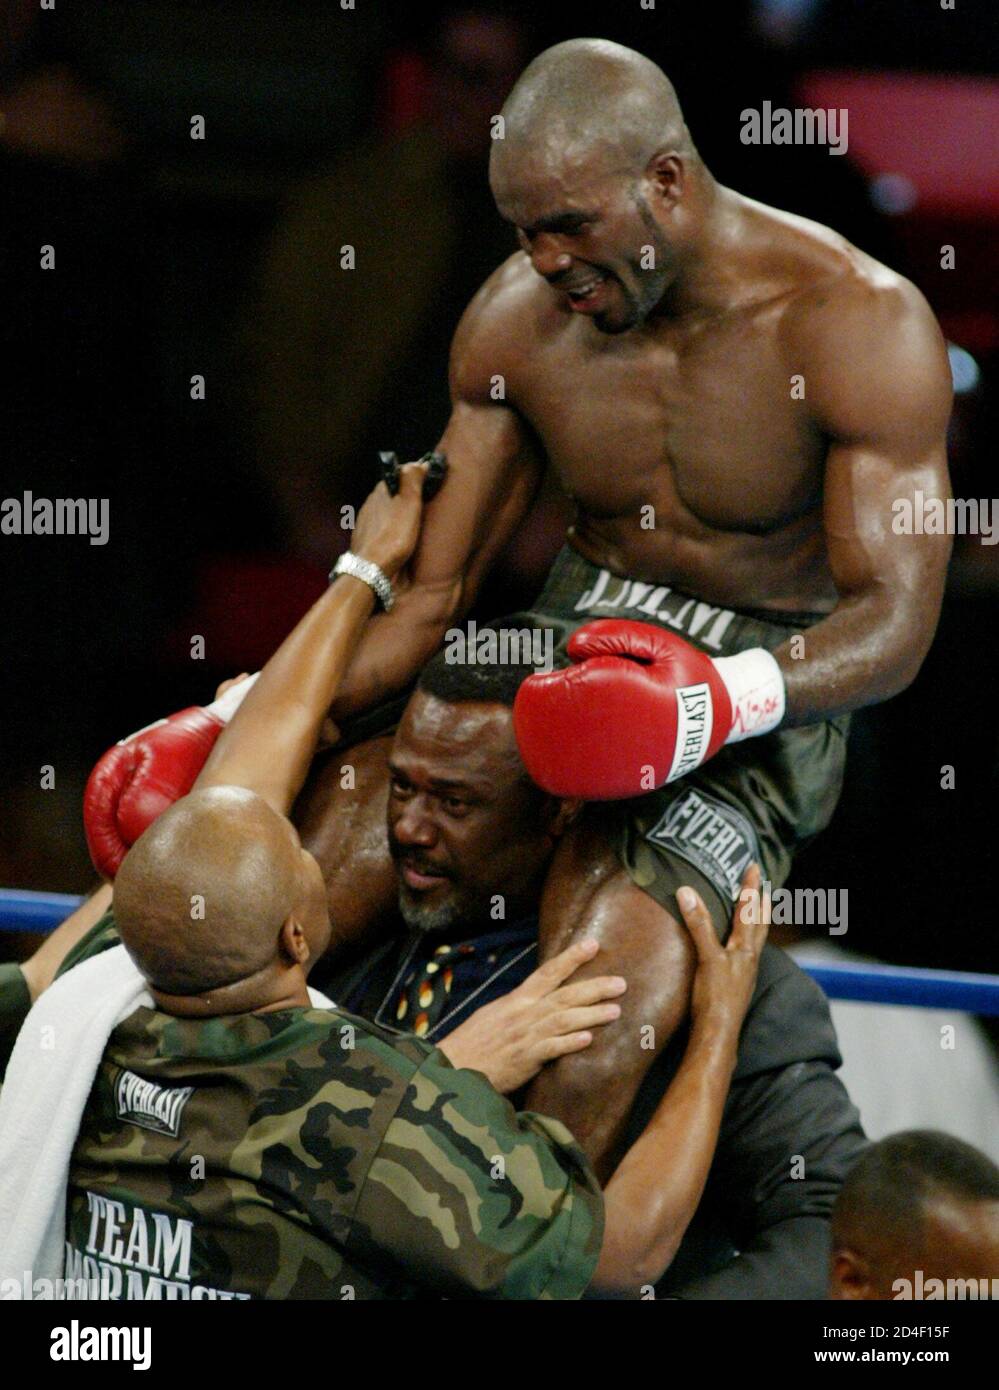 WBA cruiserweight champion Jean-Marc Mormeck of Noisy LeGrand, France is  carried around the ring after an eight round TKO over Alexander Gurov of  Marioupol, Ukraine at the Thomas & Mack Center in